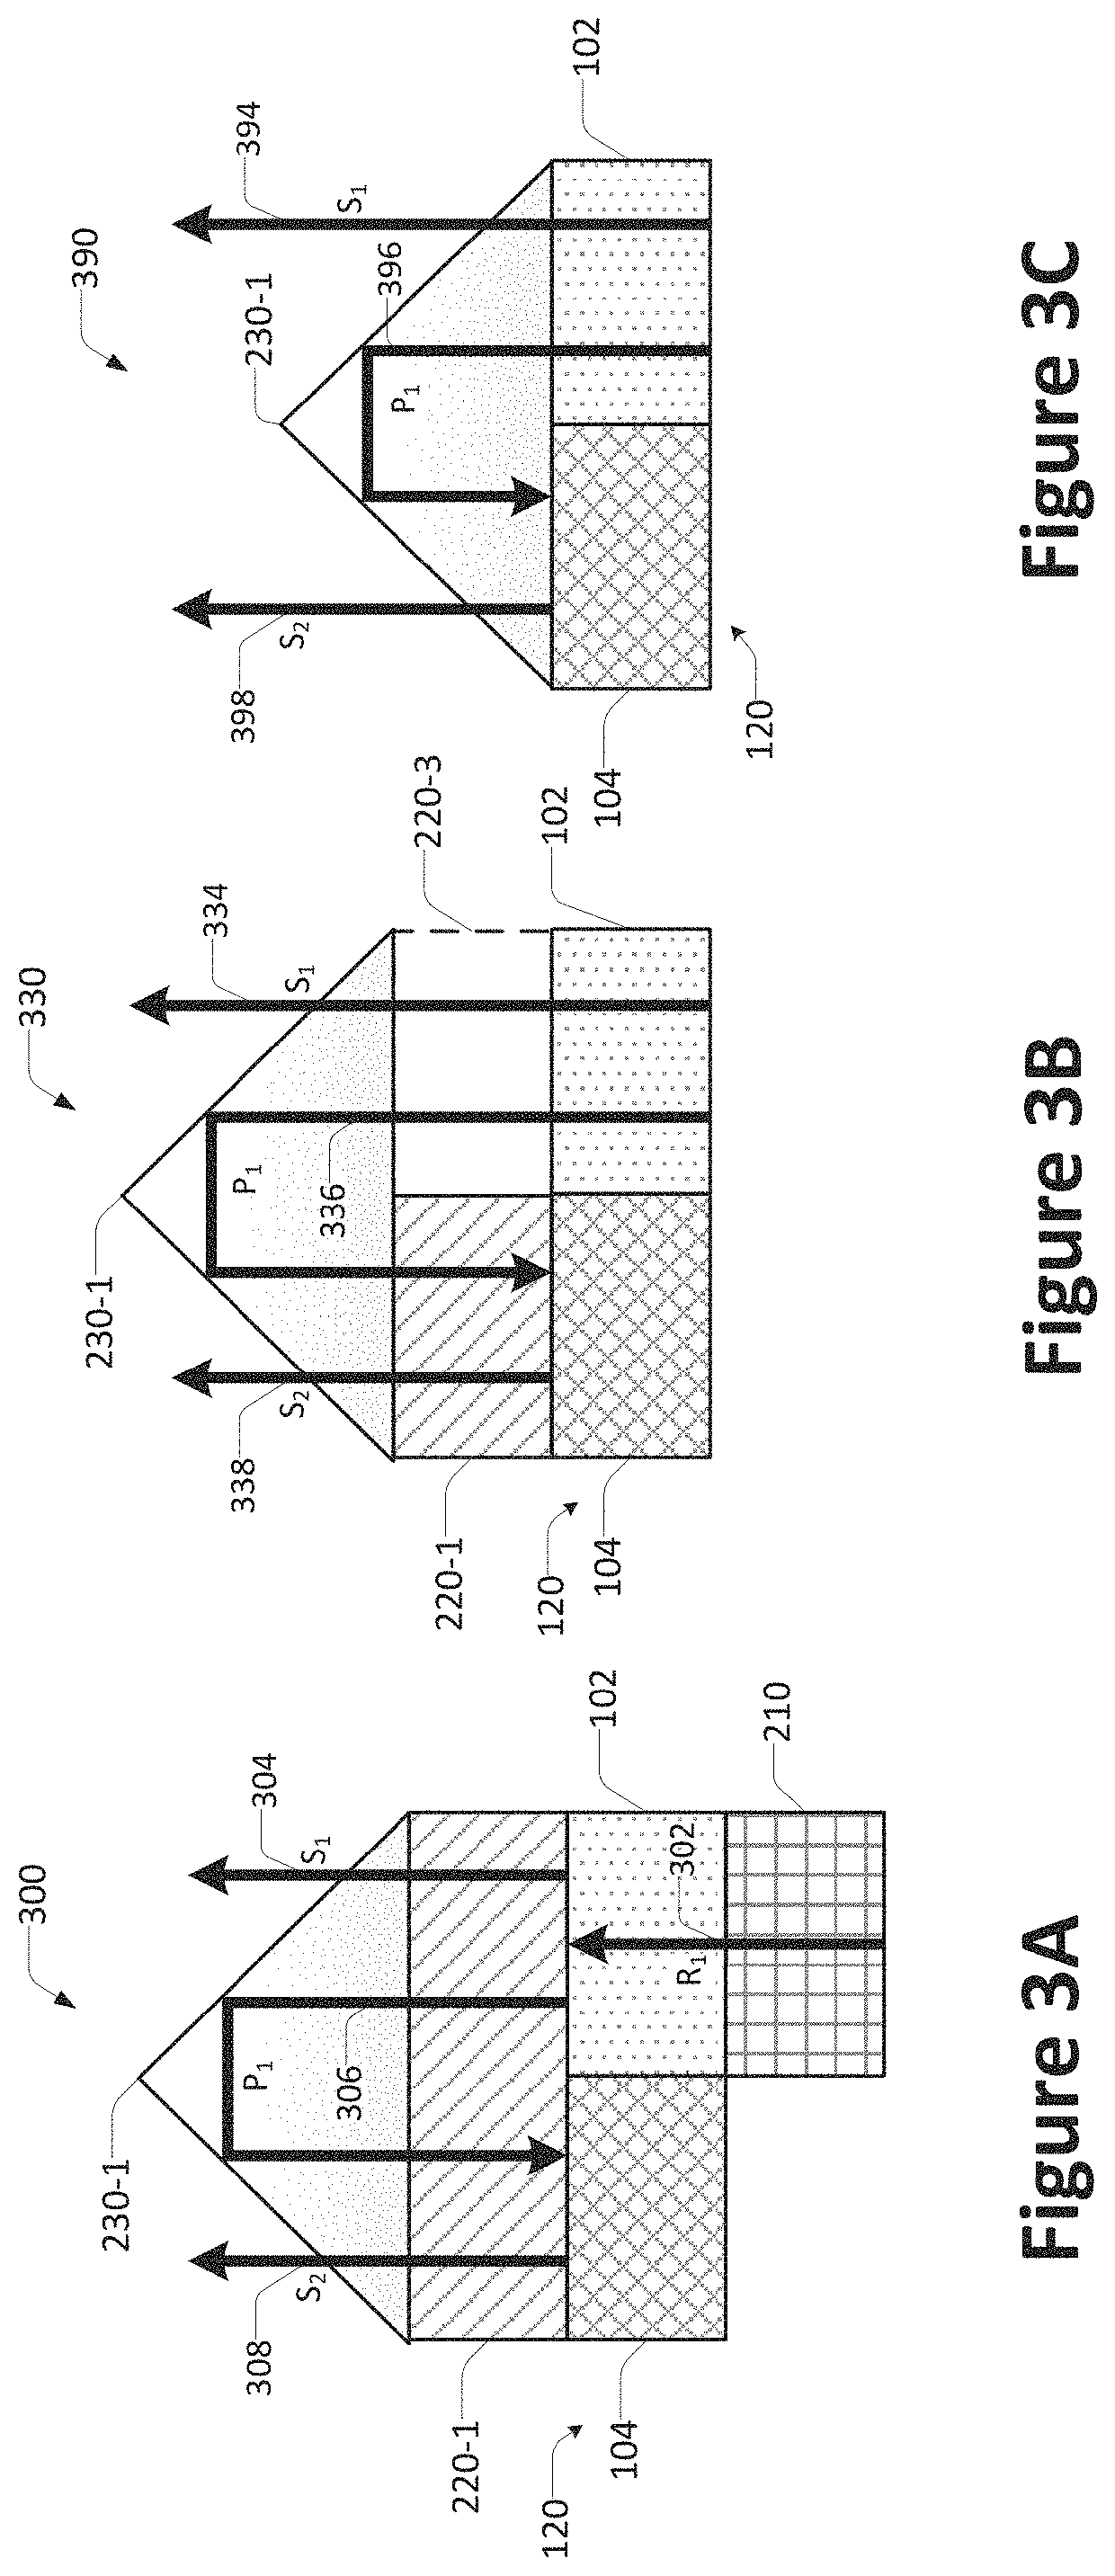 Display system with extended display area